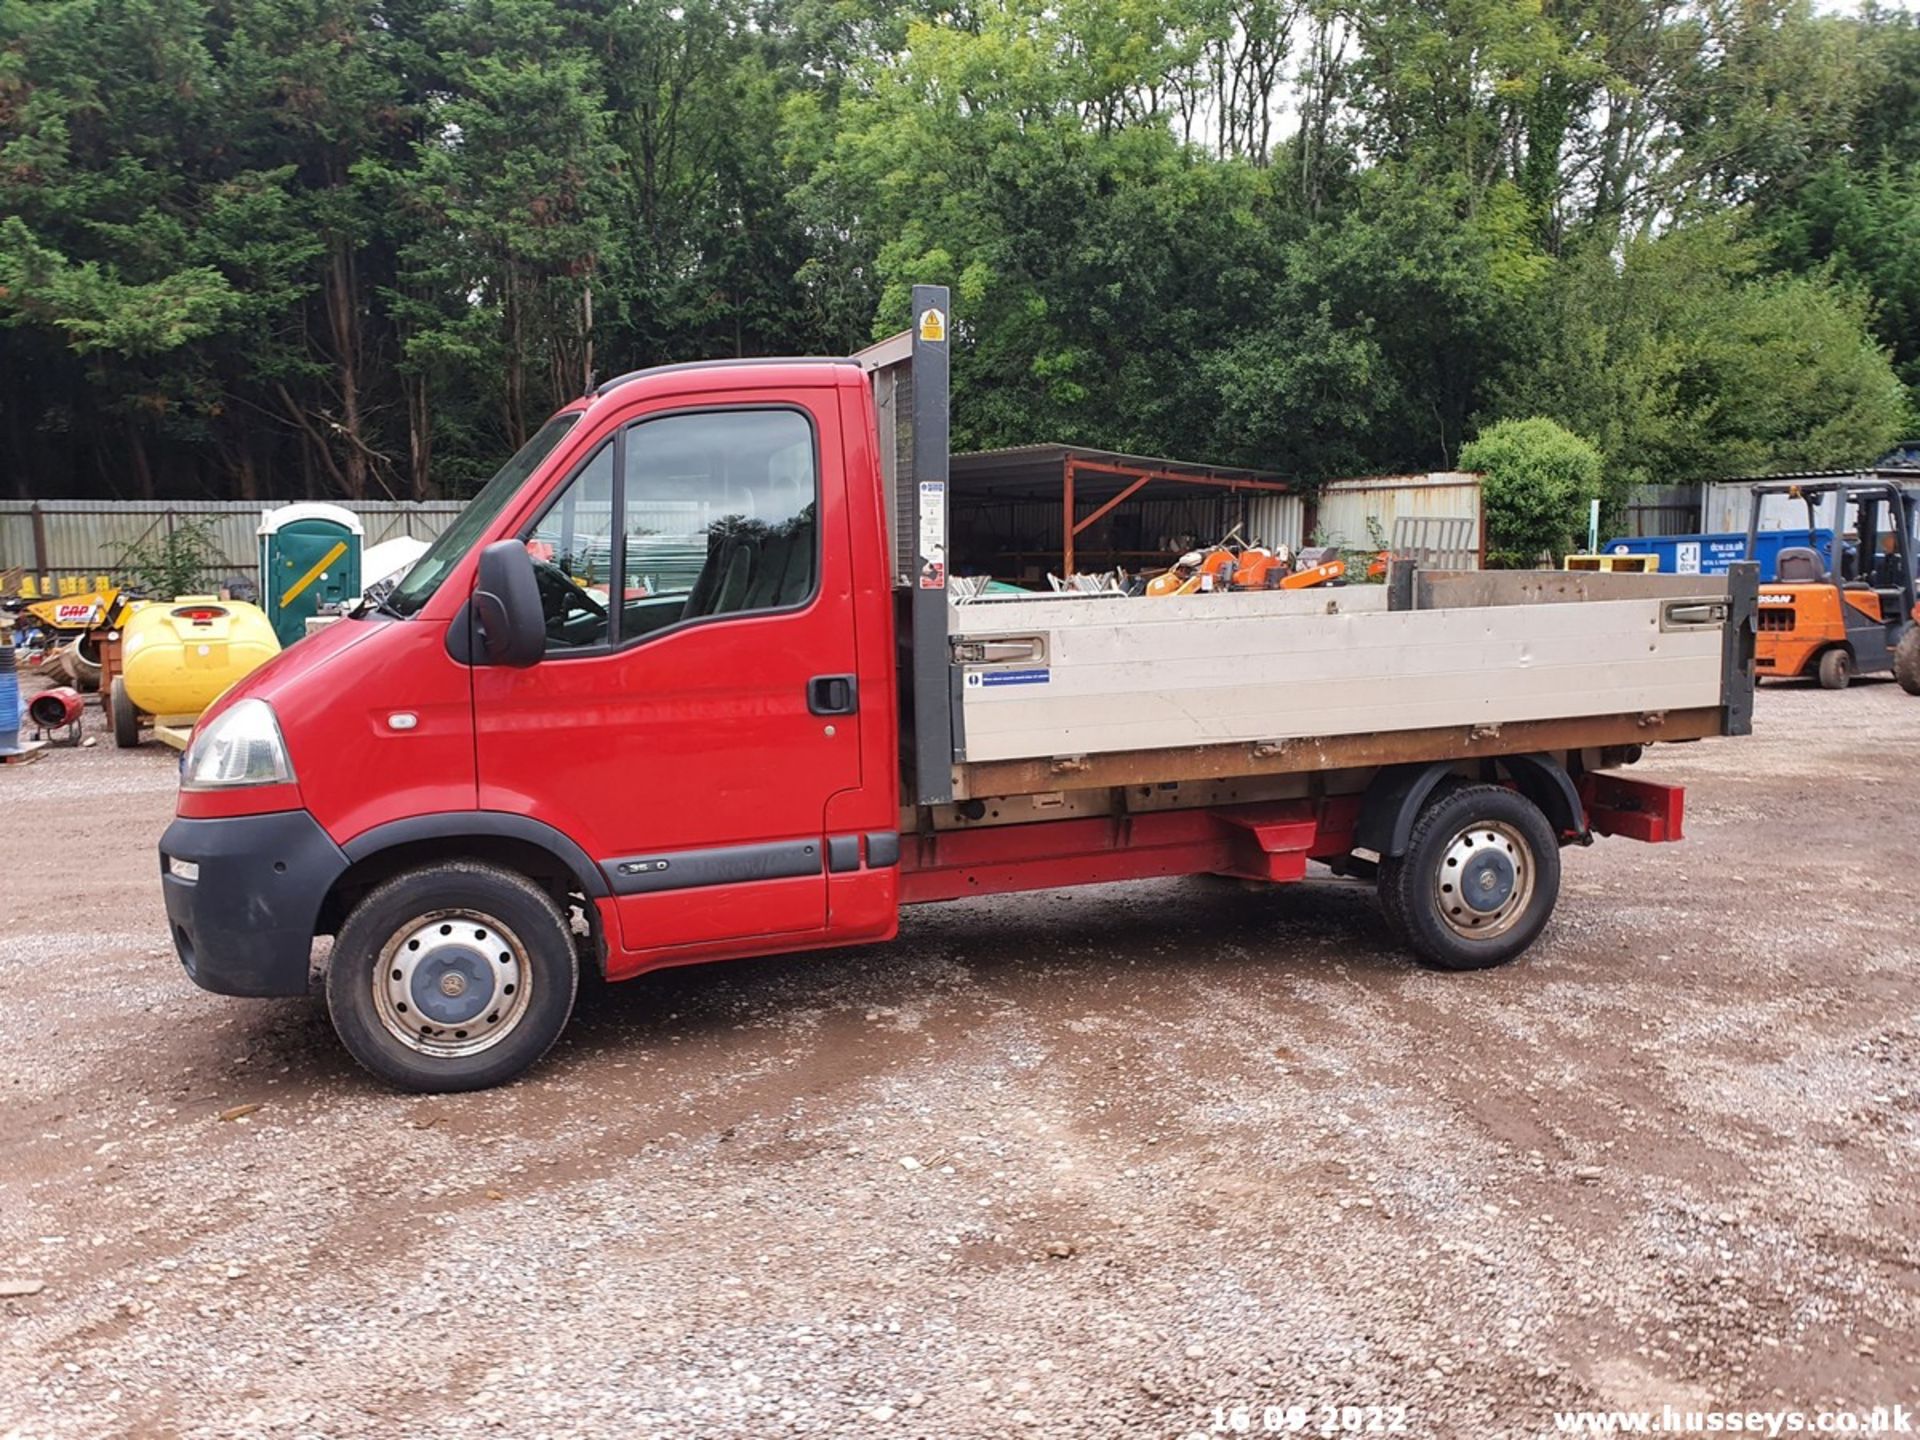 11/11 VAUXHALL MOVANO 3500 CDTI MWB - 2464cc 2dr Tipper (Red, 52k) - Image 19 of 44